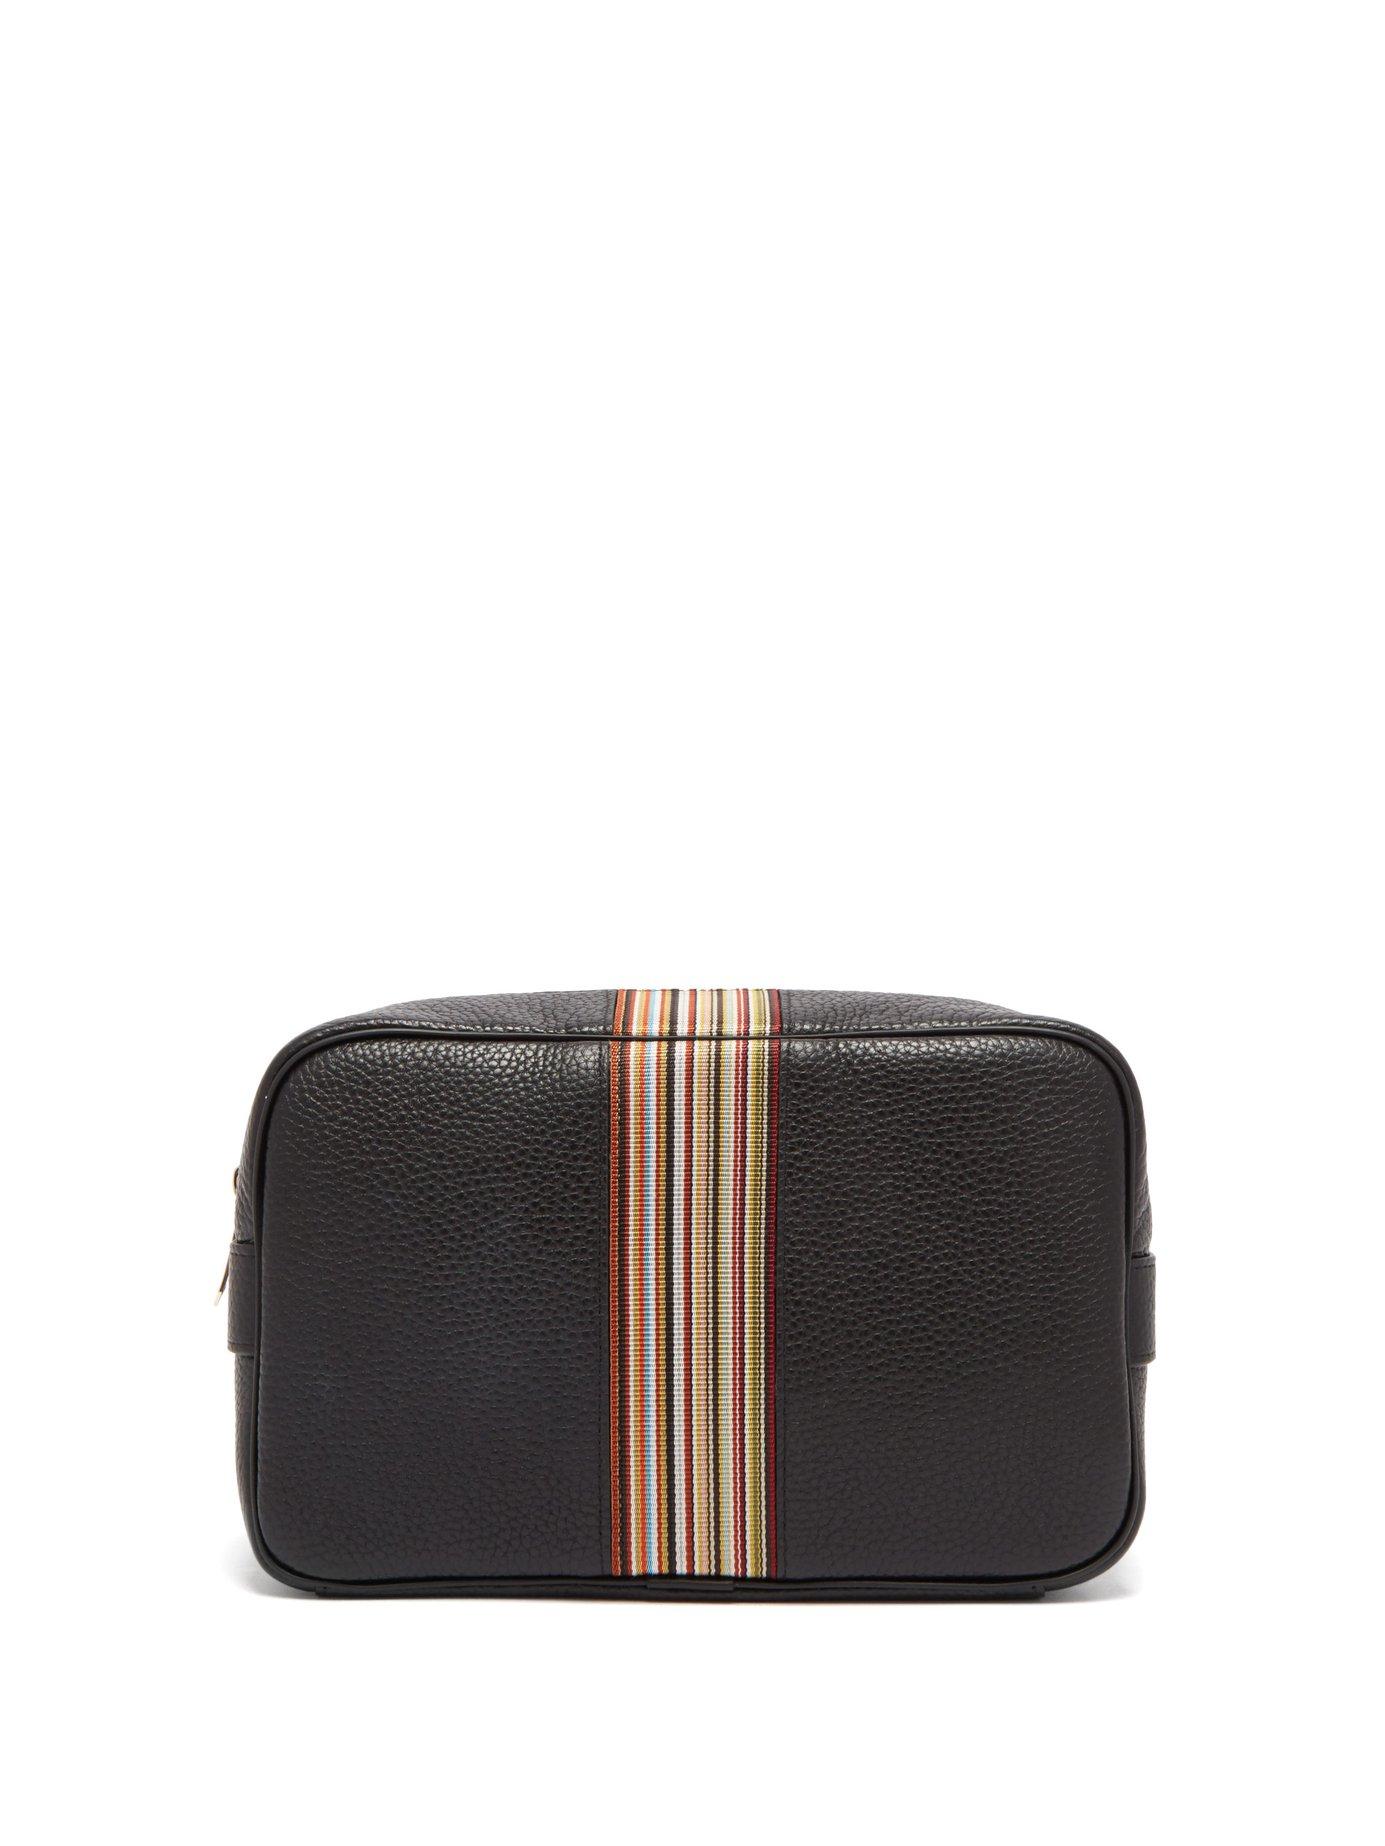 Paul Smith Signature Stripe Grained Leather Wash Bag in Black for Men - Lyst